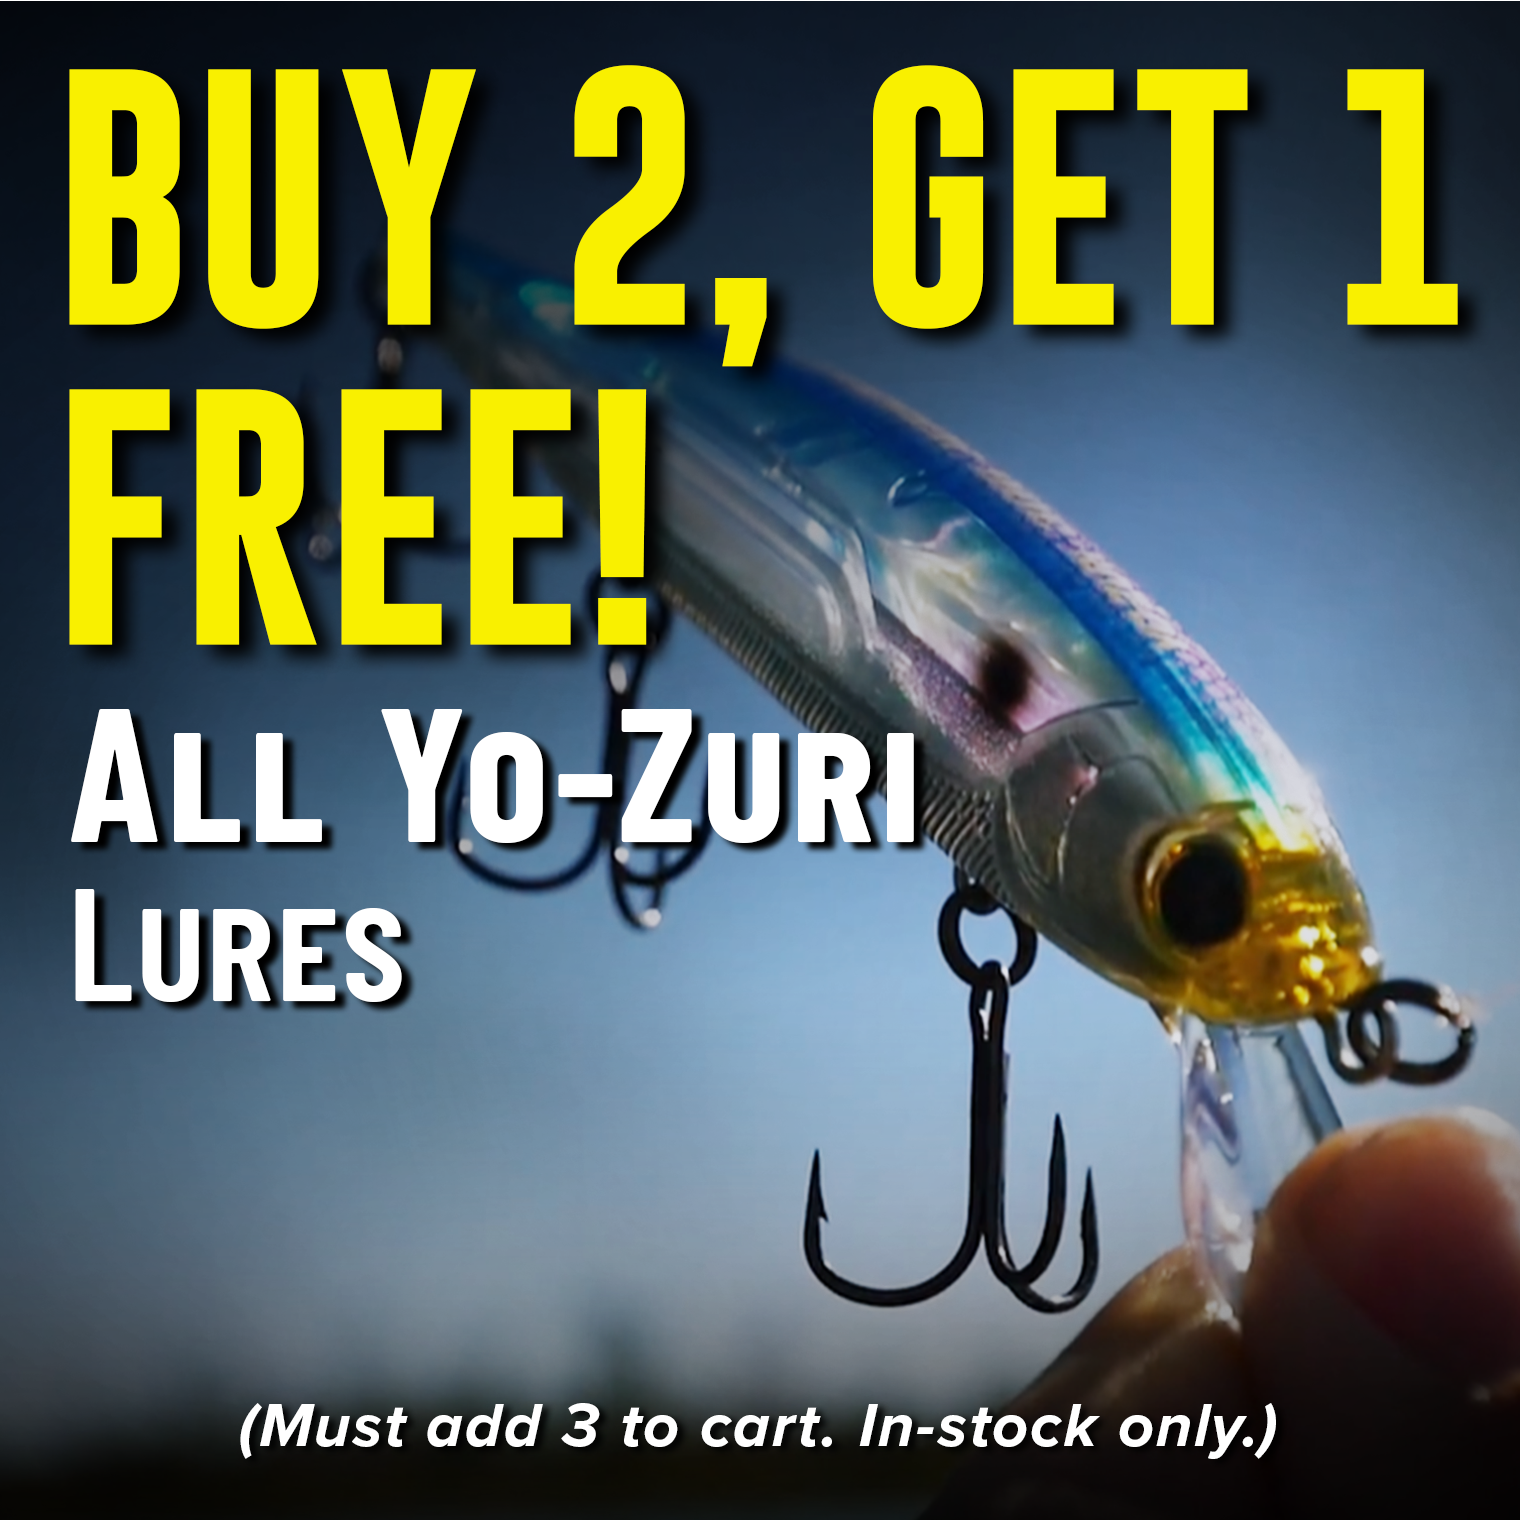 Buy 2, Get 1 Free! All Yo-Zuri Lures (Must add 3 to cart. In-stock only.)